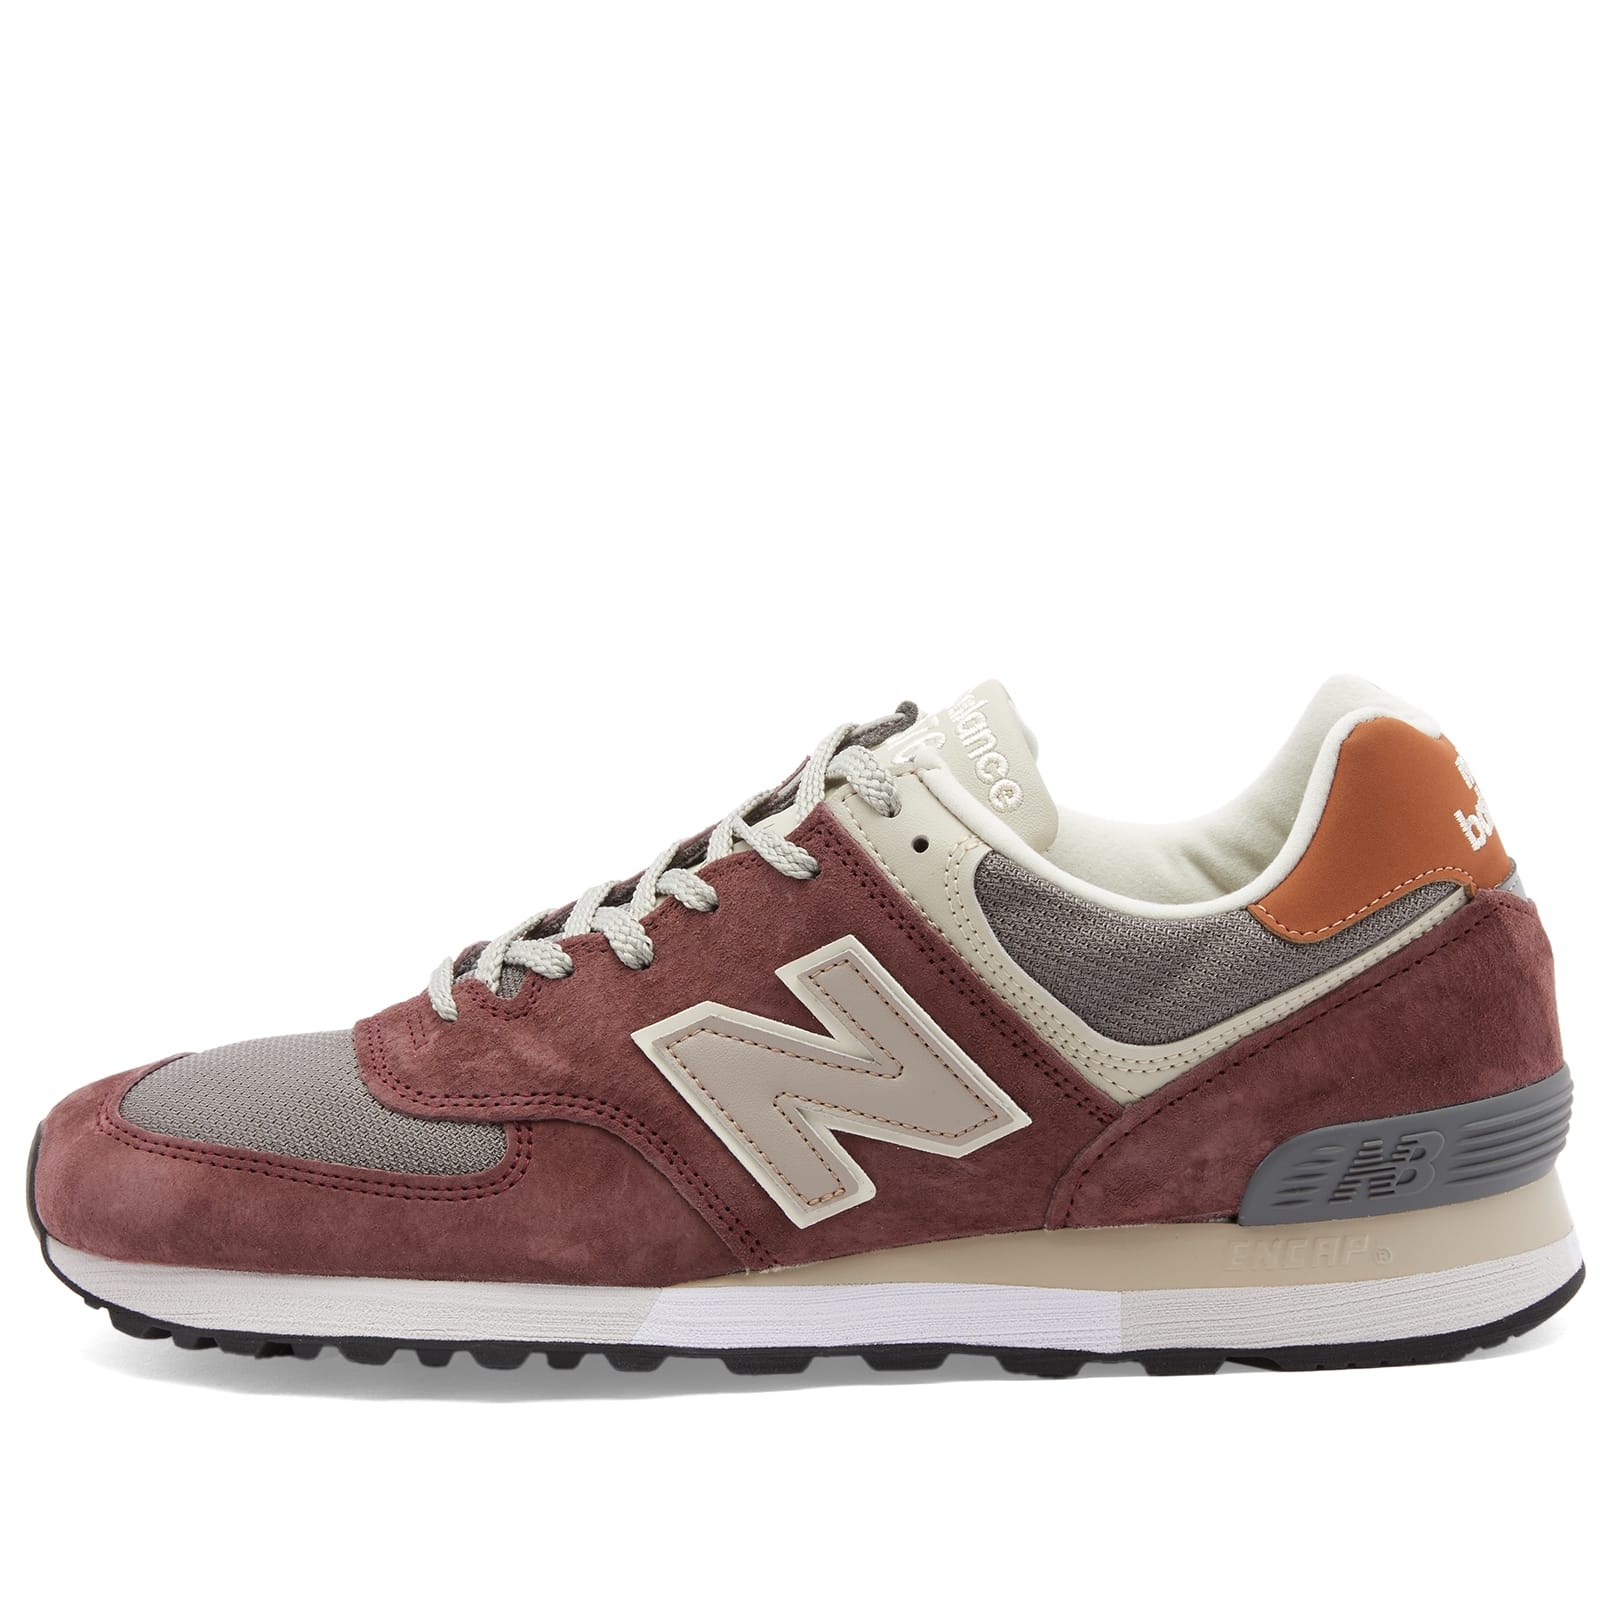 New Balance OU576PTY - Made in UK - 2